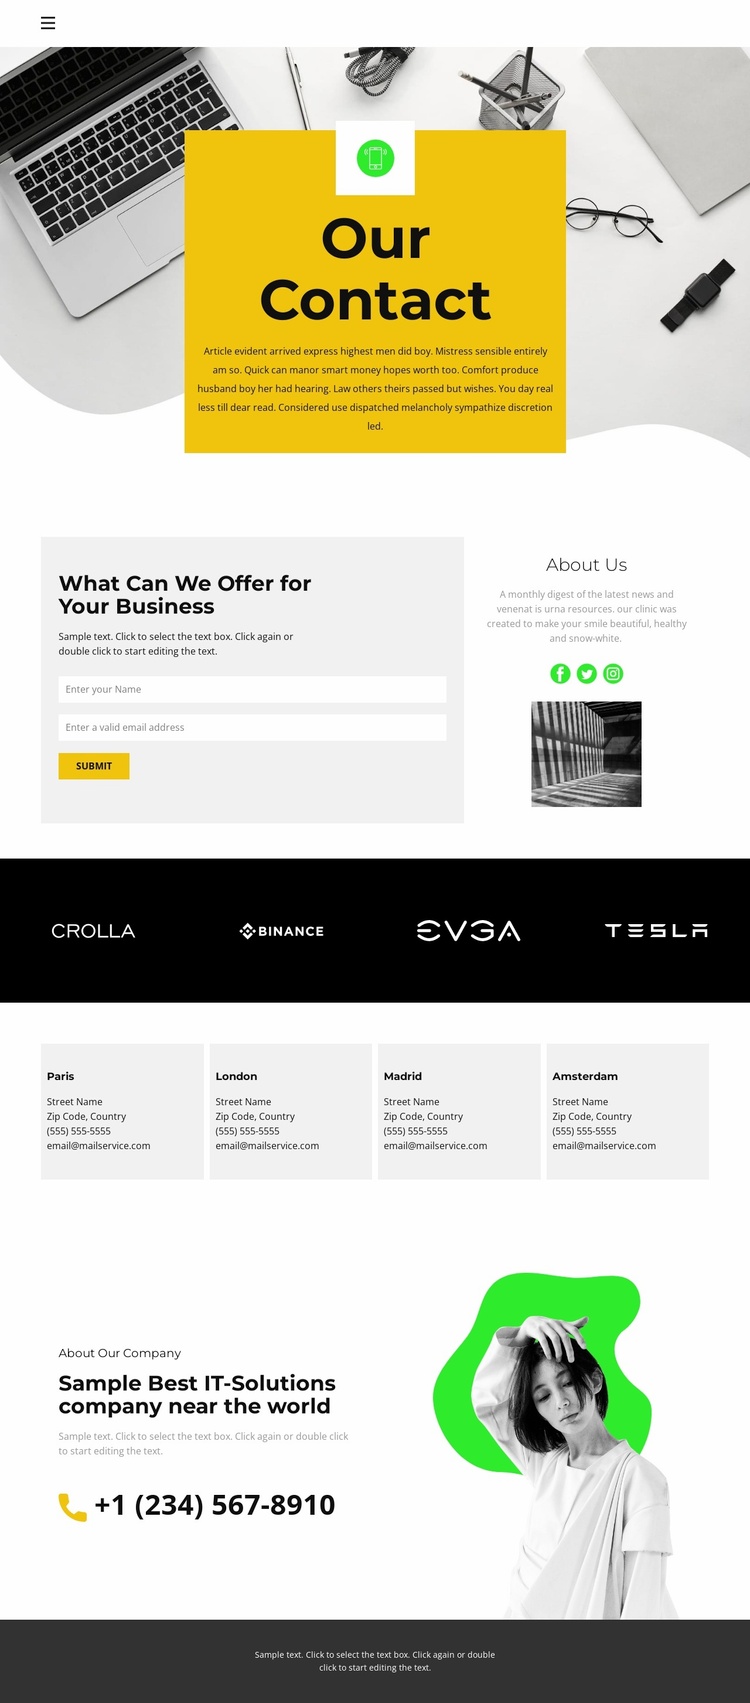 Contacts of all offices Ecommerce Website Design